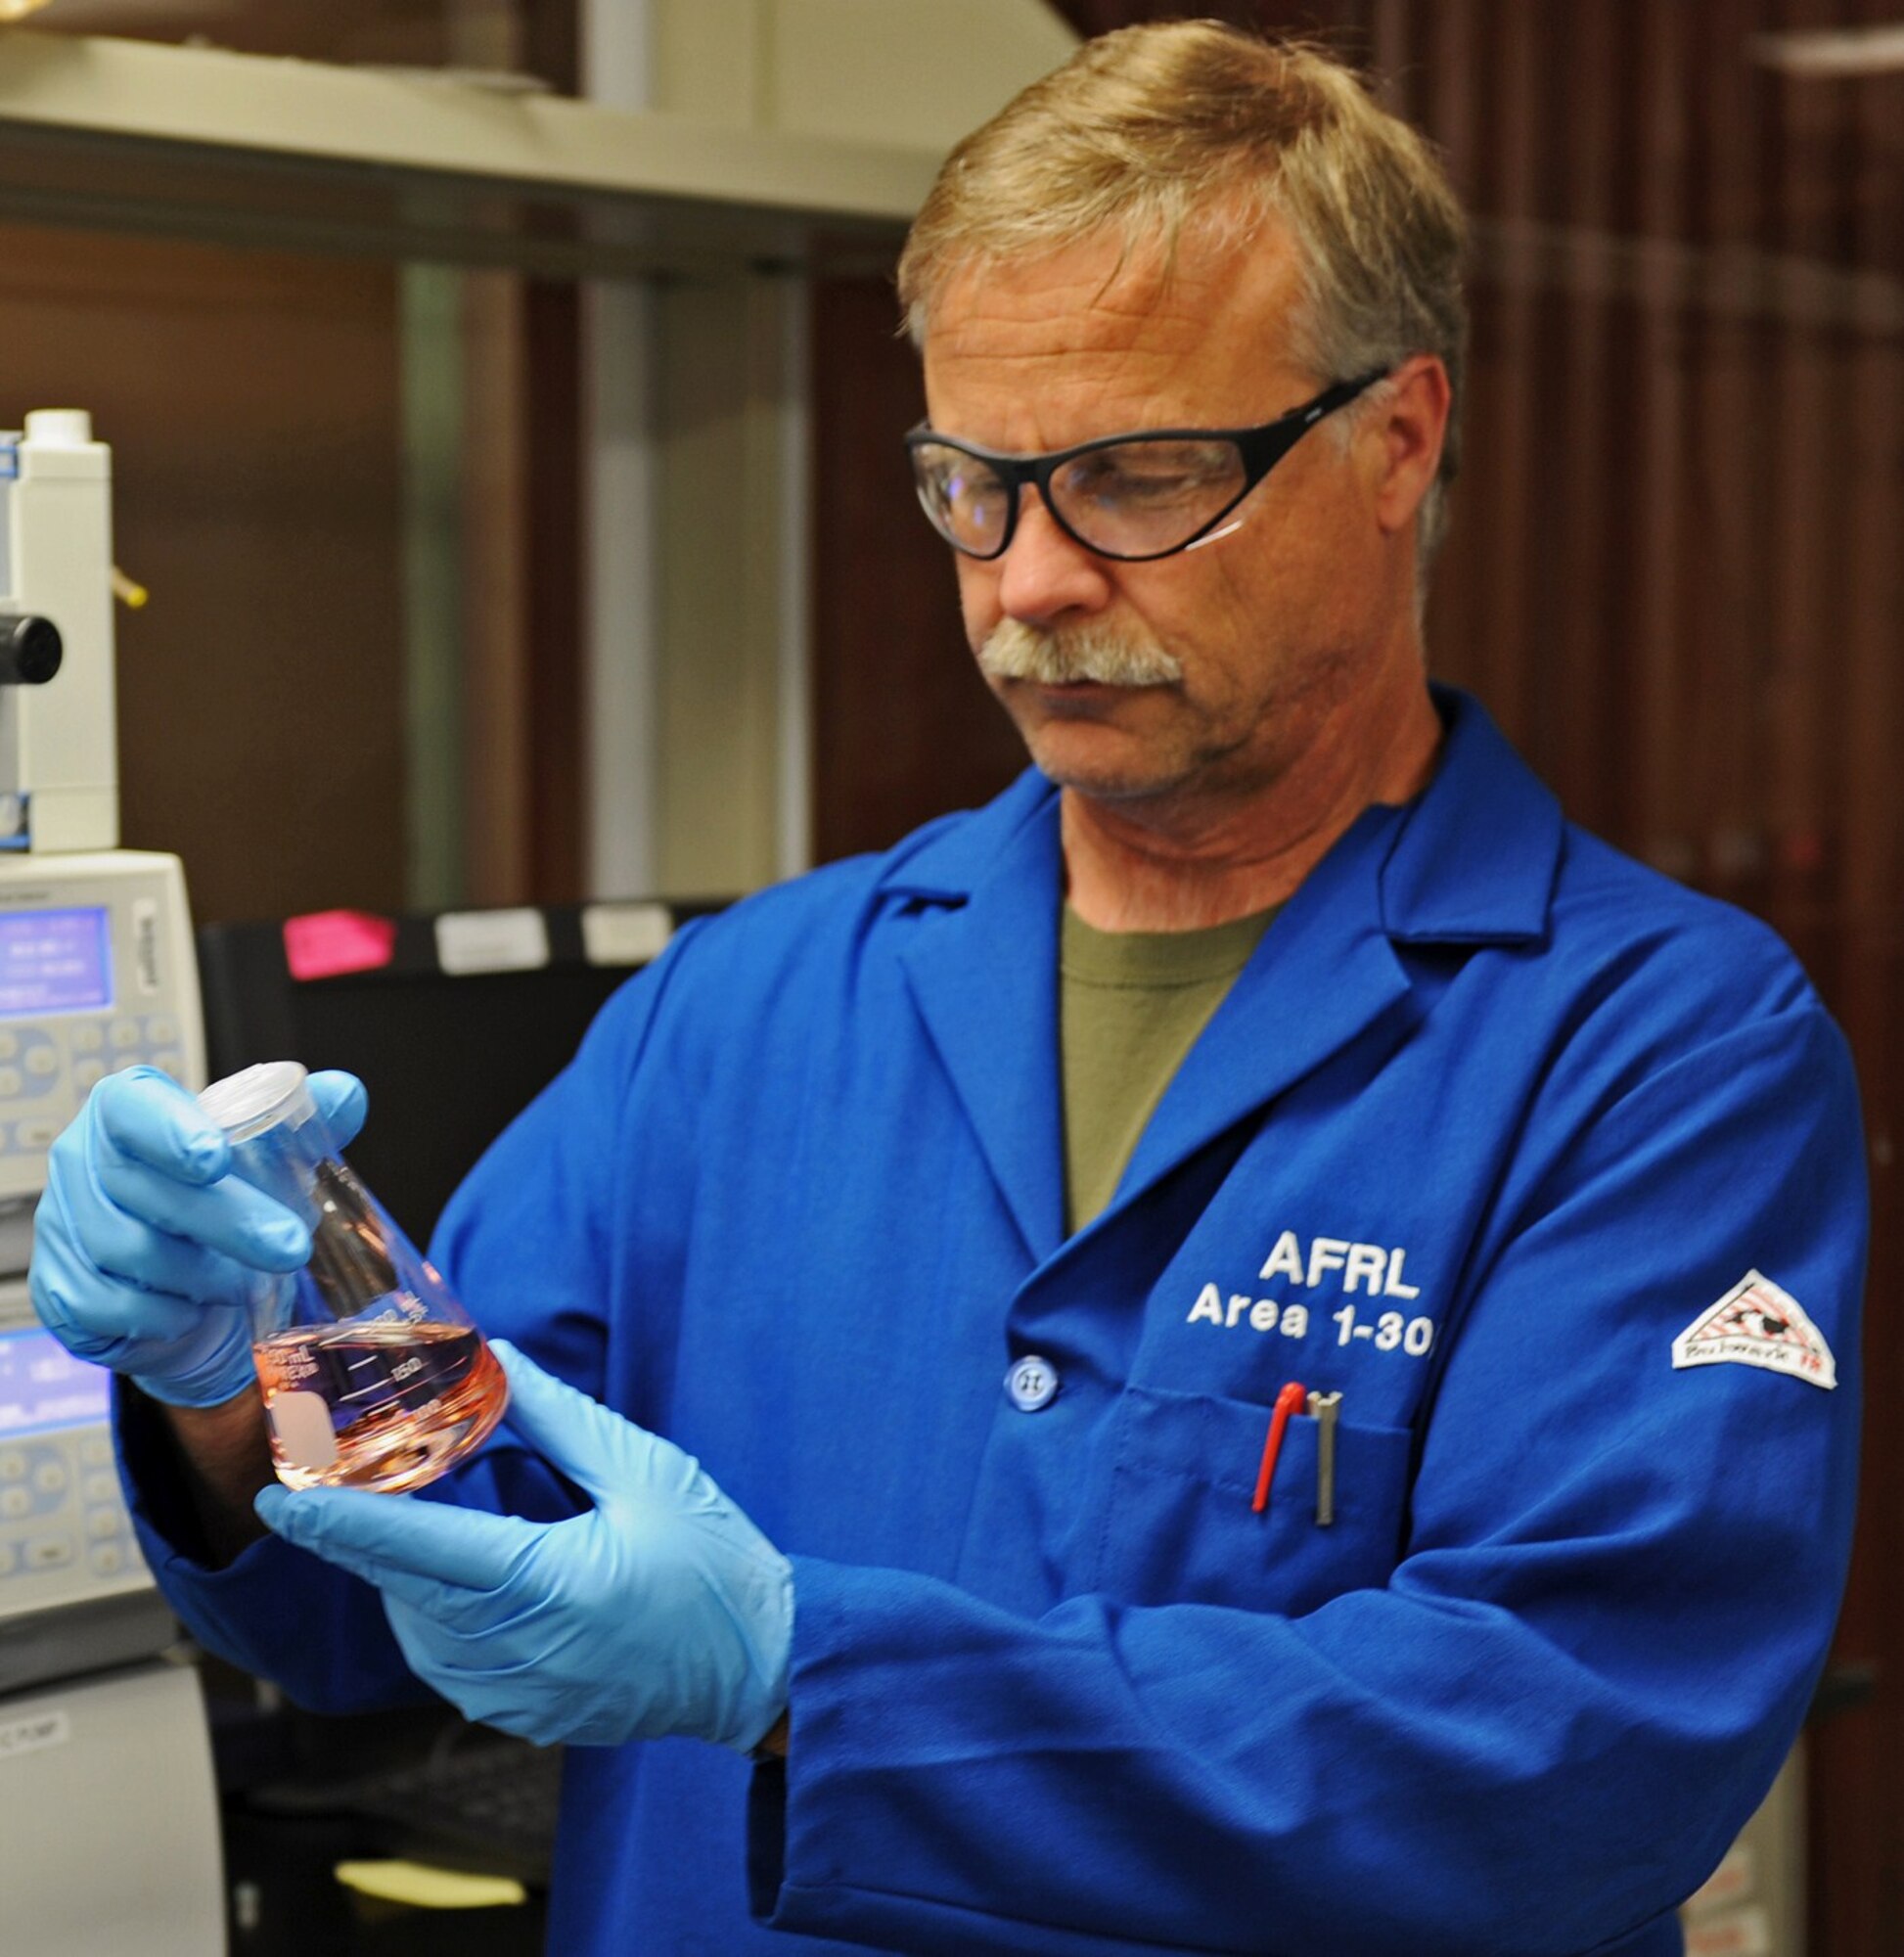 Milton McKay, a research chemist from the Air Force Research Laboratory’s Rocket Propulsion Division at Edwards AFB, California, examines a sample of the AFRL developed ASCENT (Advanced Spacecraft Energetic Non-toxic Propellant) green propellant. (Courtesy photo)